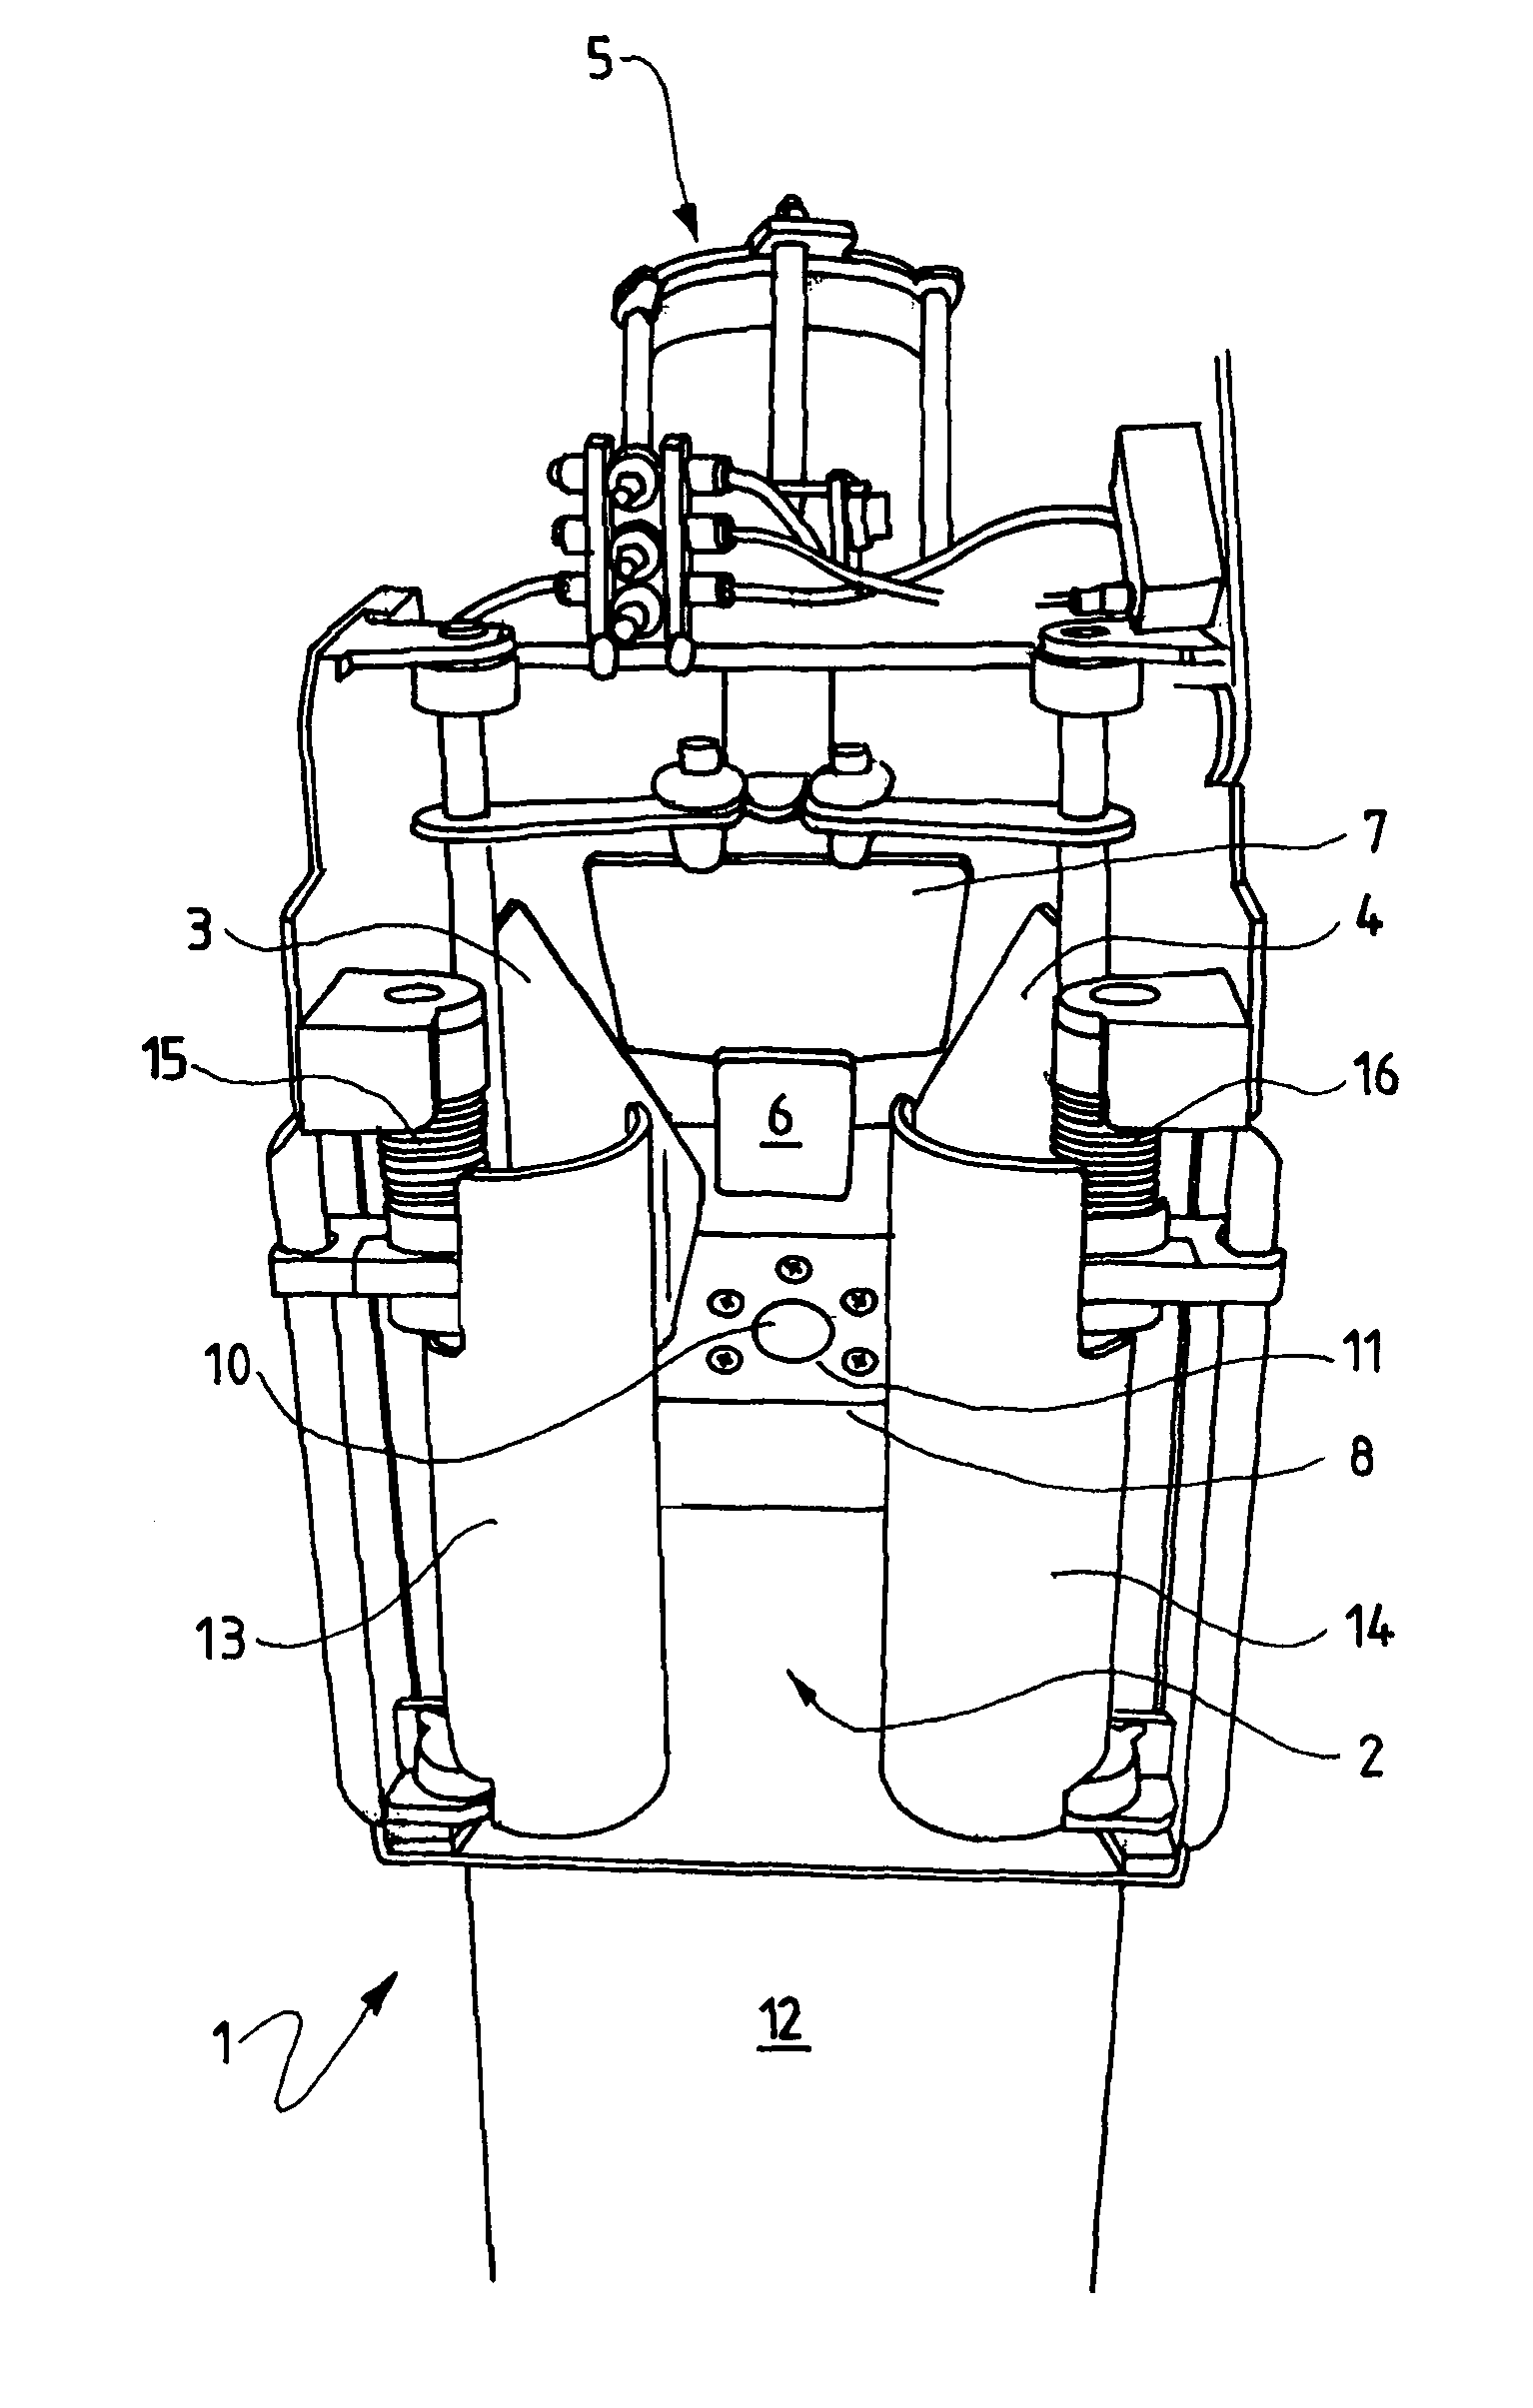 Fish processing device